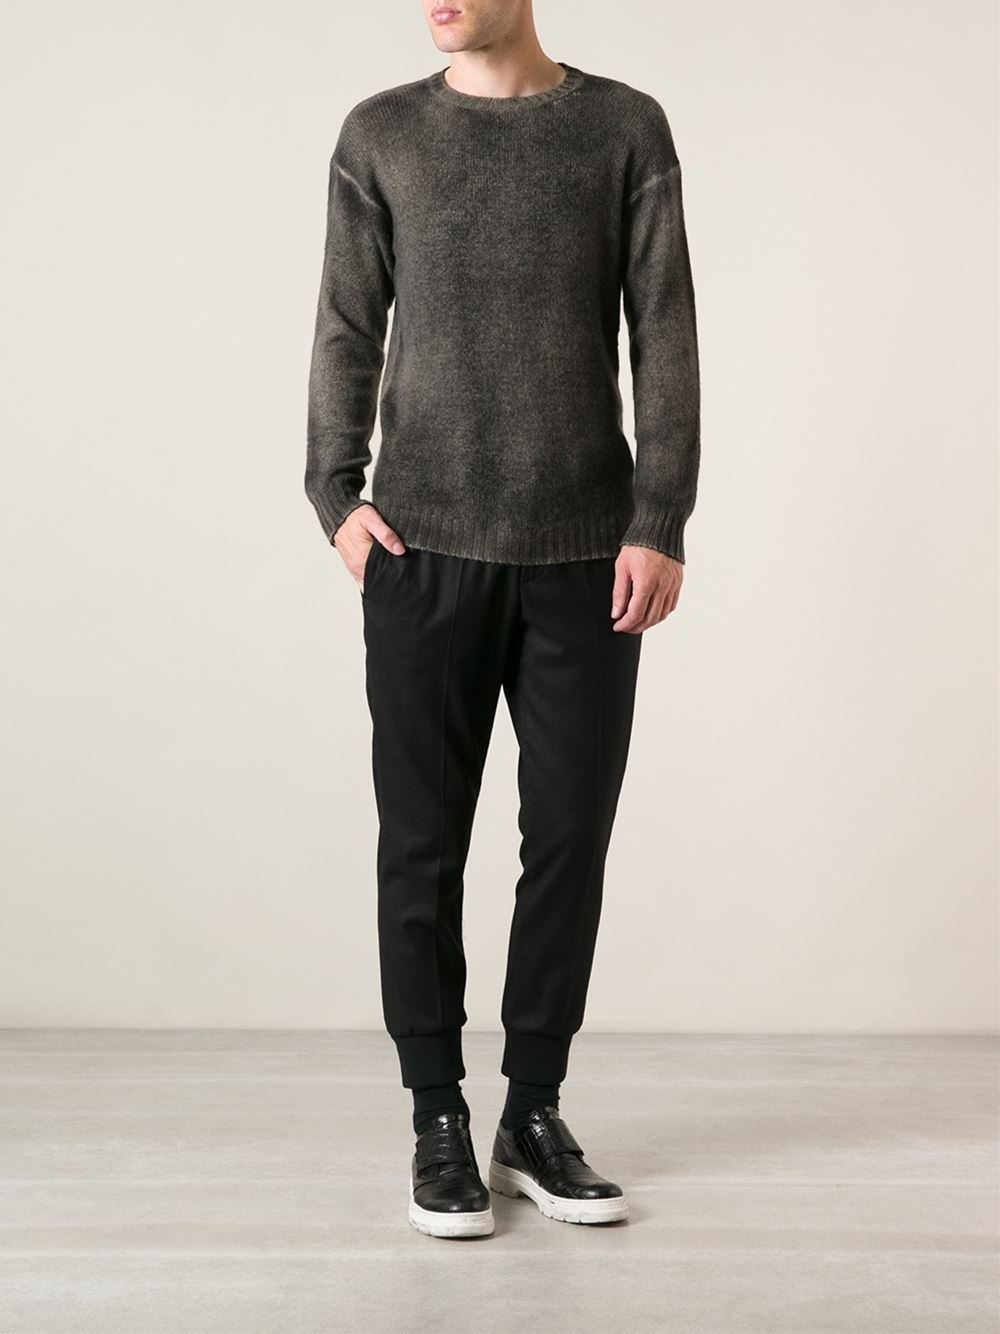 Avant Toi Distressed Sweater in Grey (Gray) for Men - Lyst